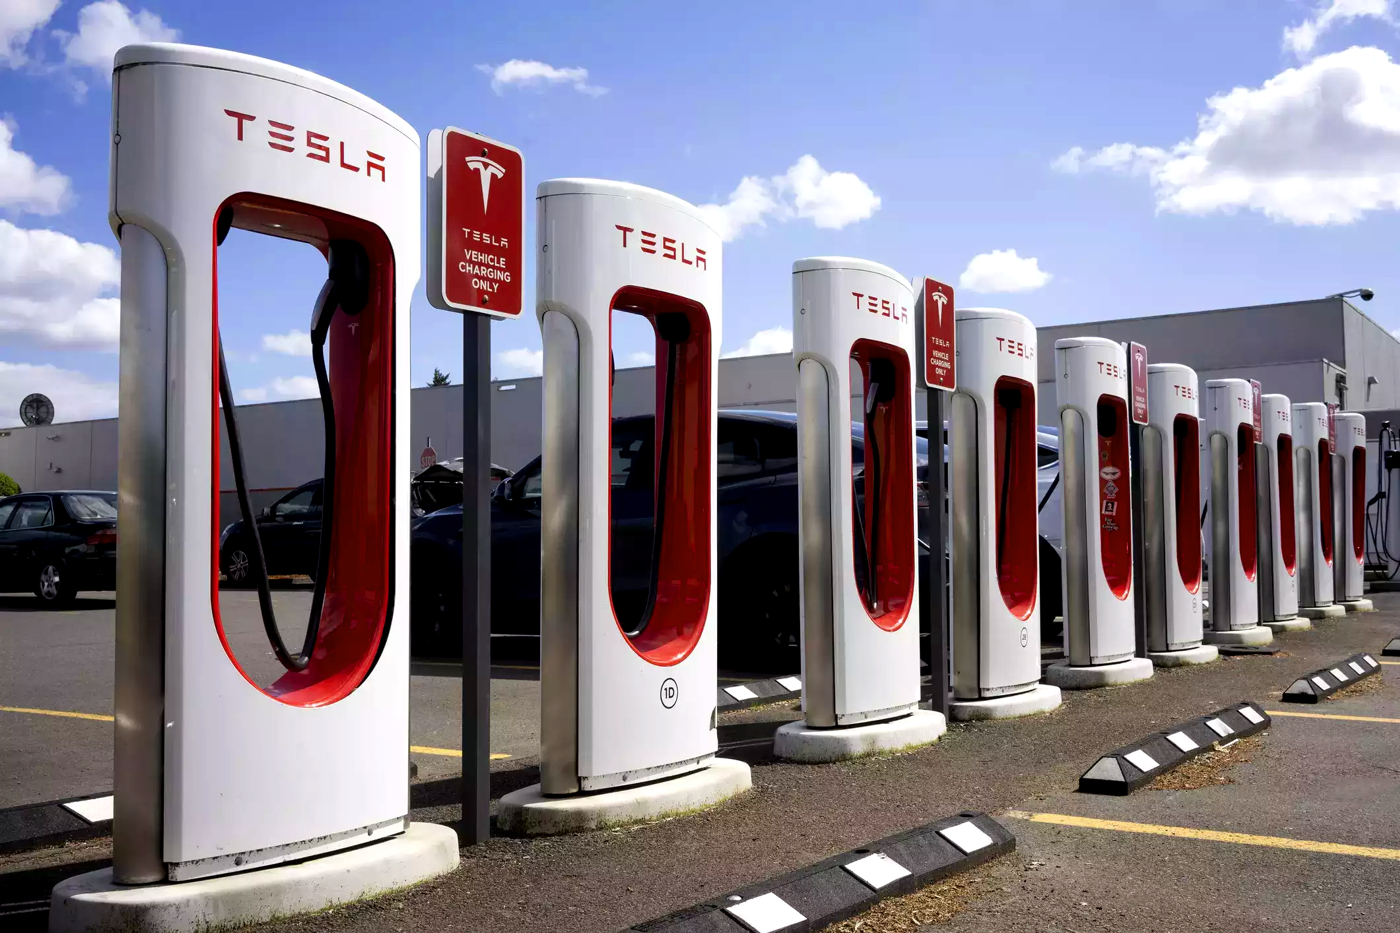 Tesla Charging Network: All EVs Compatible With It